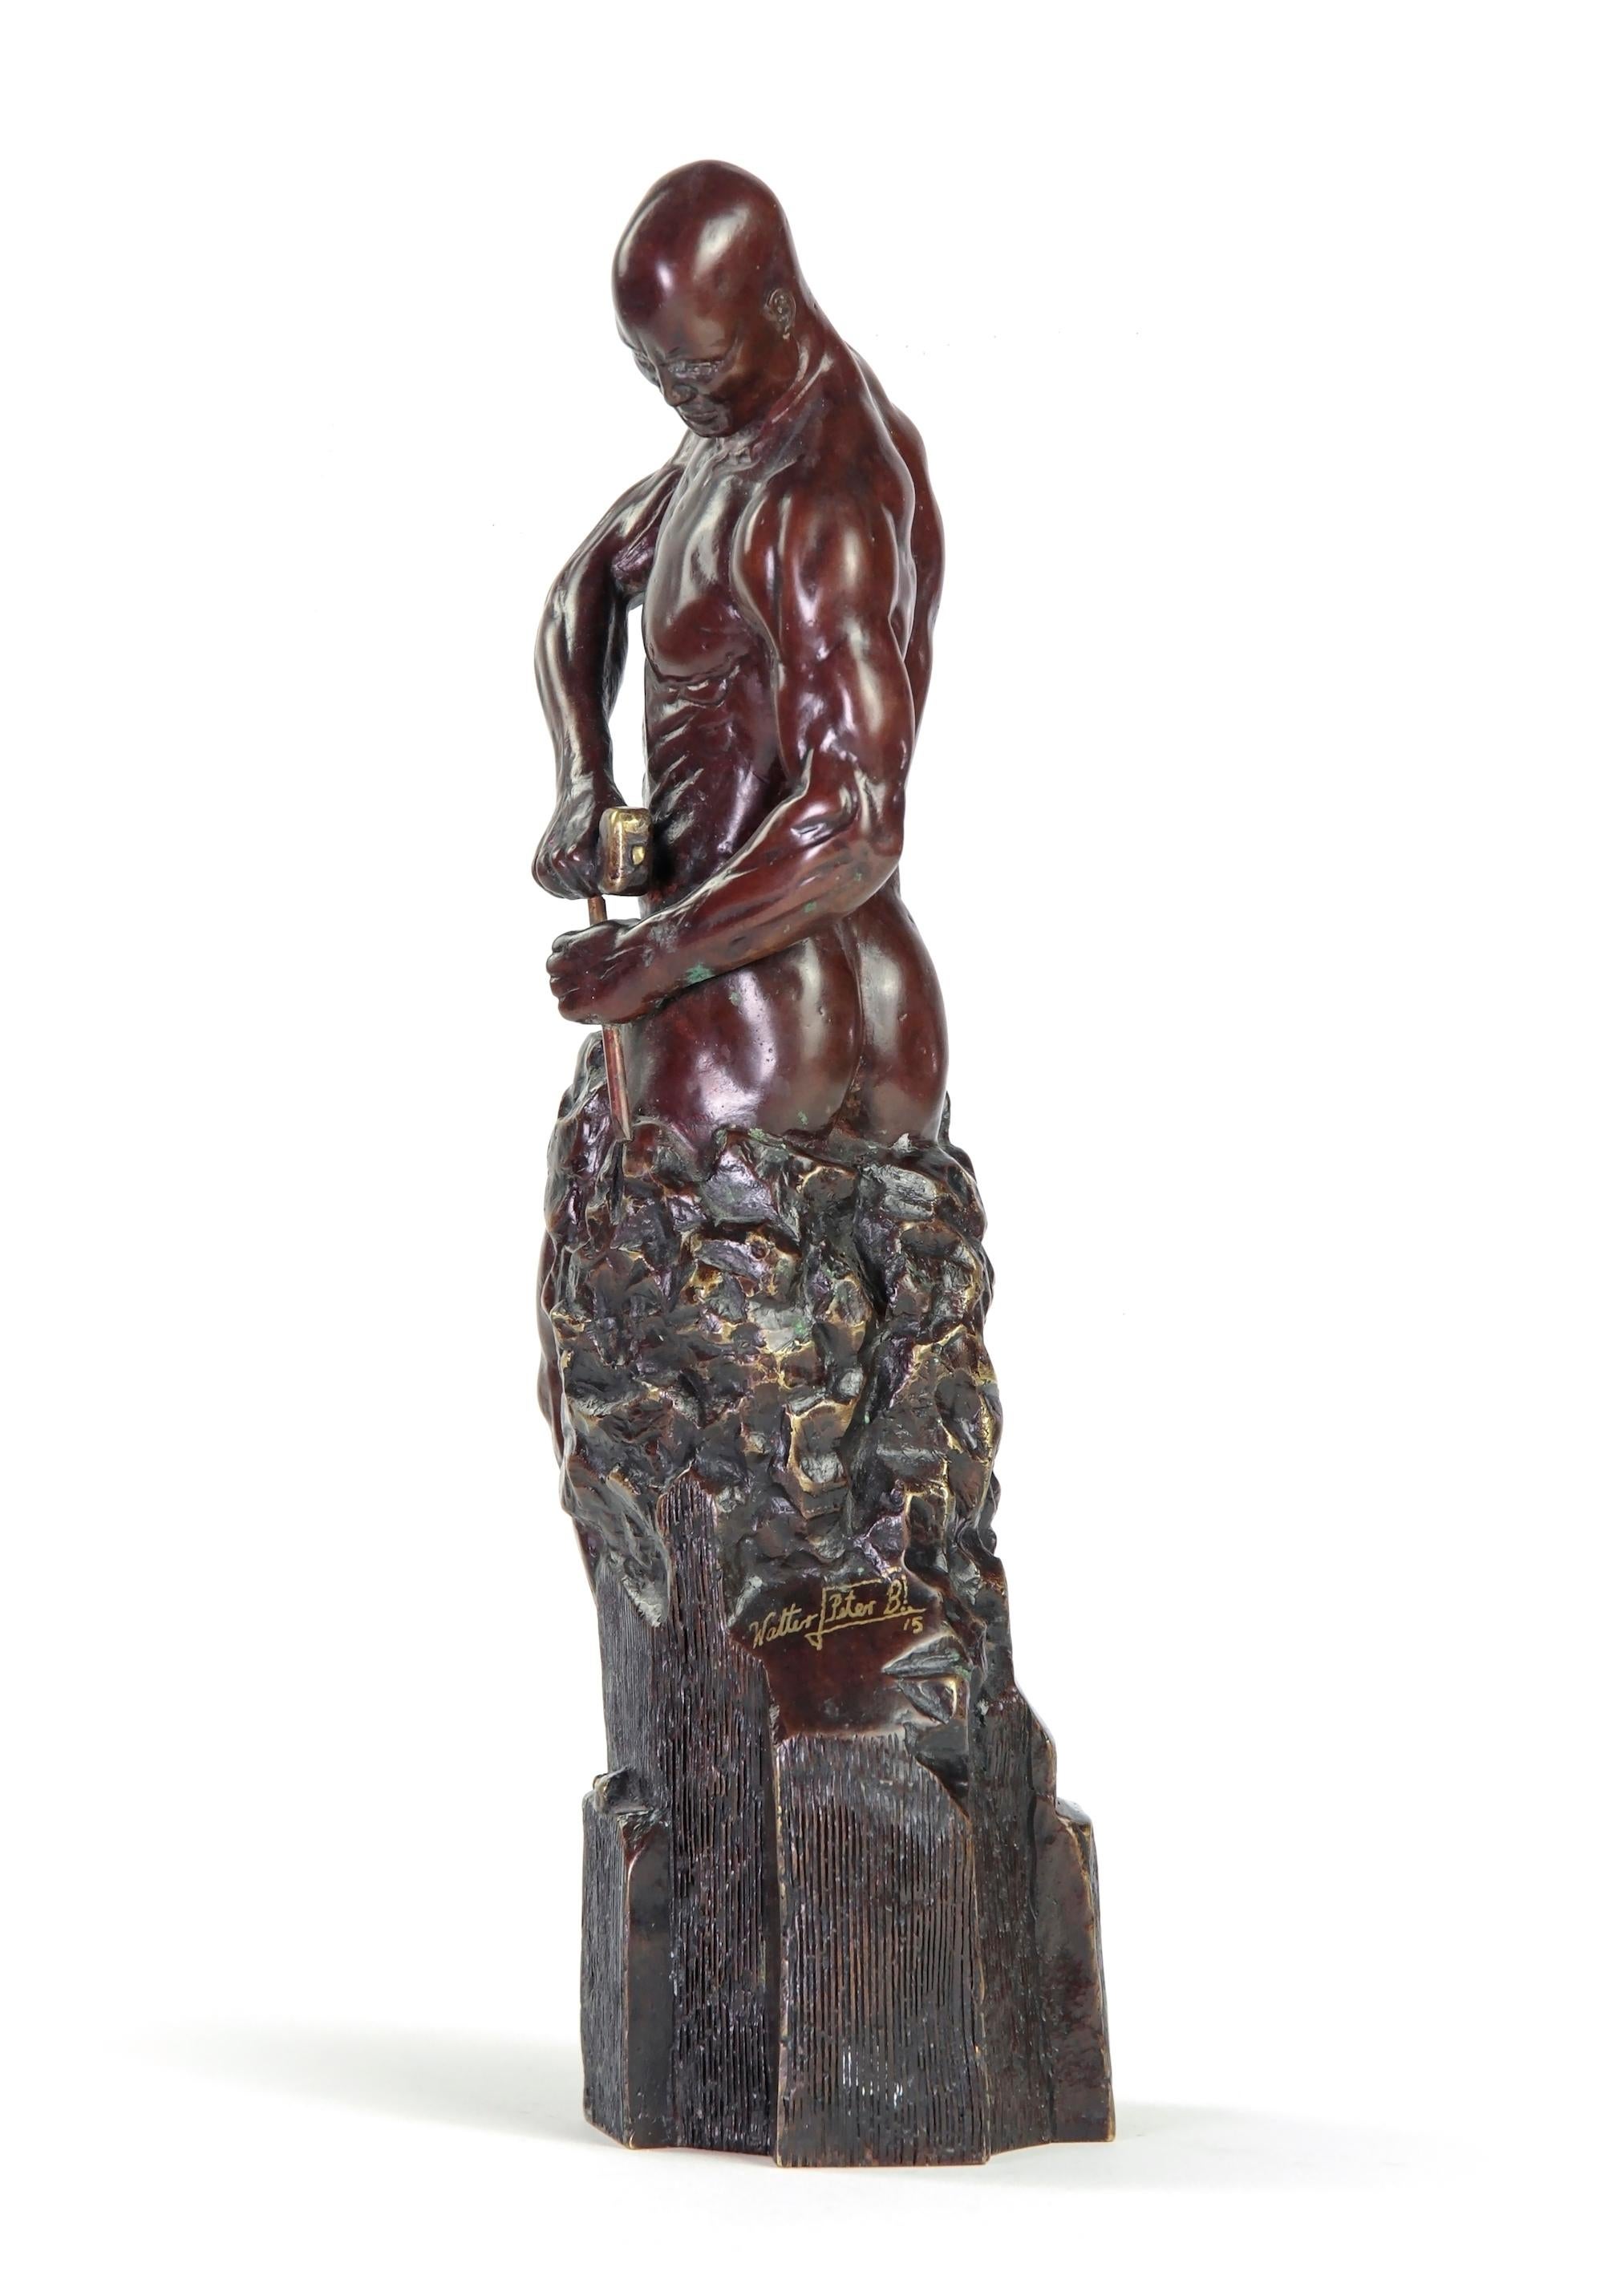 Master of Your Own Destiny by Walter P. Brenner - Nude male bronze sculpture - Sculpture by Walter Peter Brenner